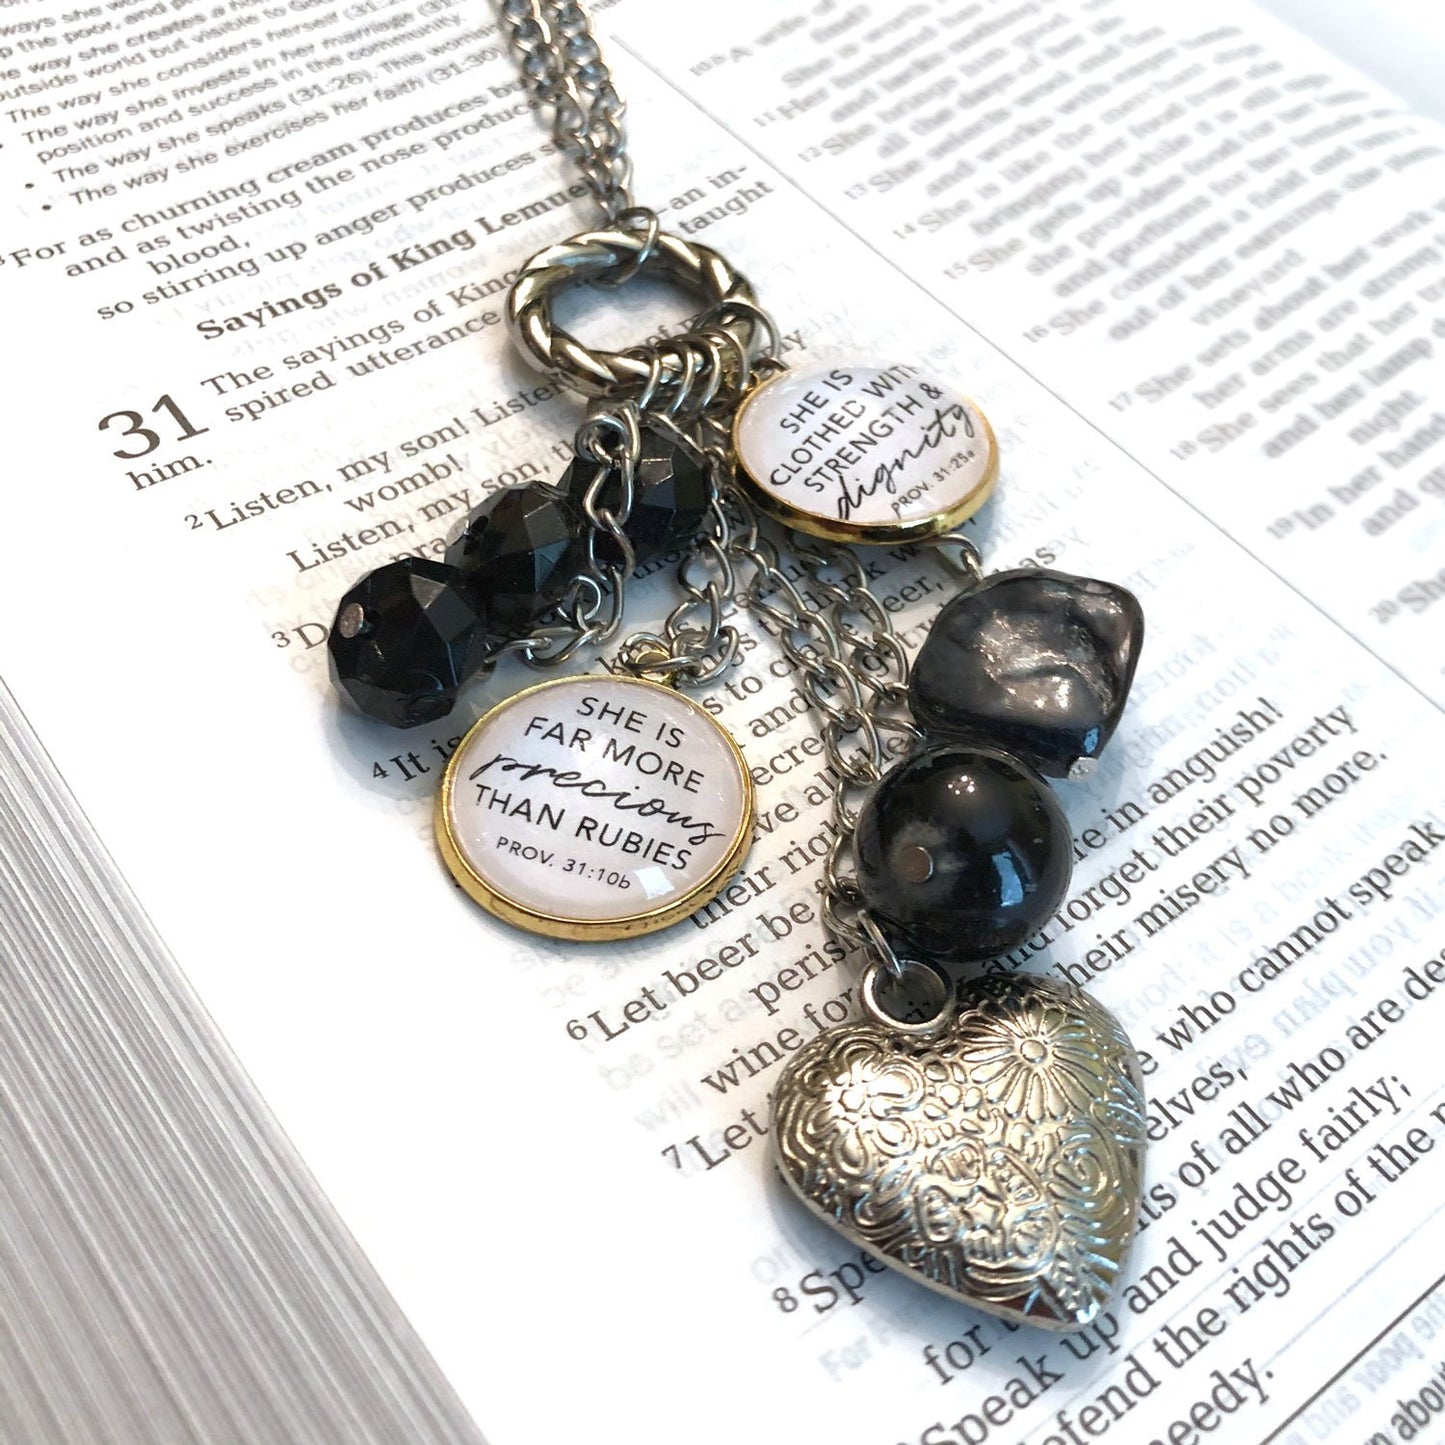 "Delight Yourself in the Lord" Psalm 37:4 Scripture Charm for Jewelry